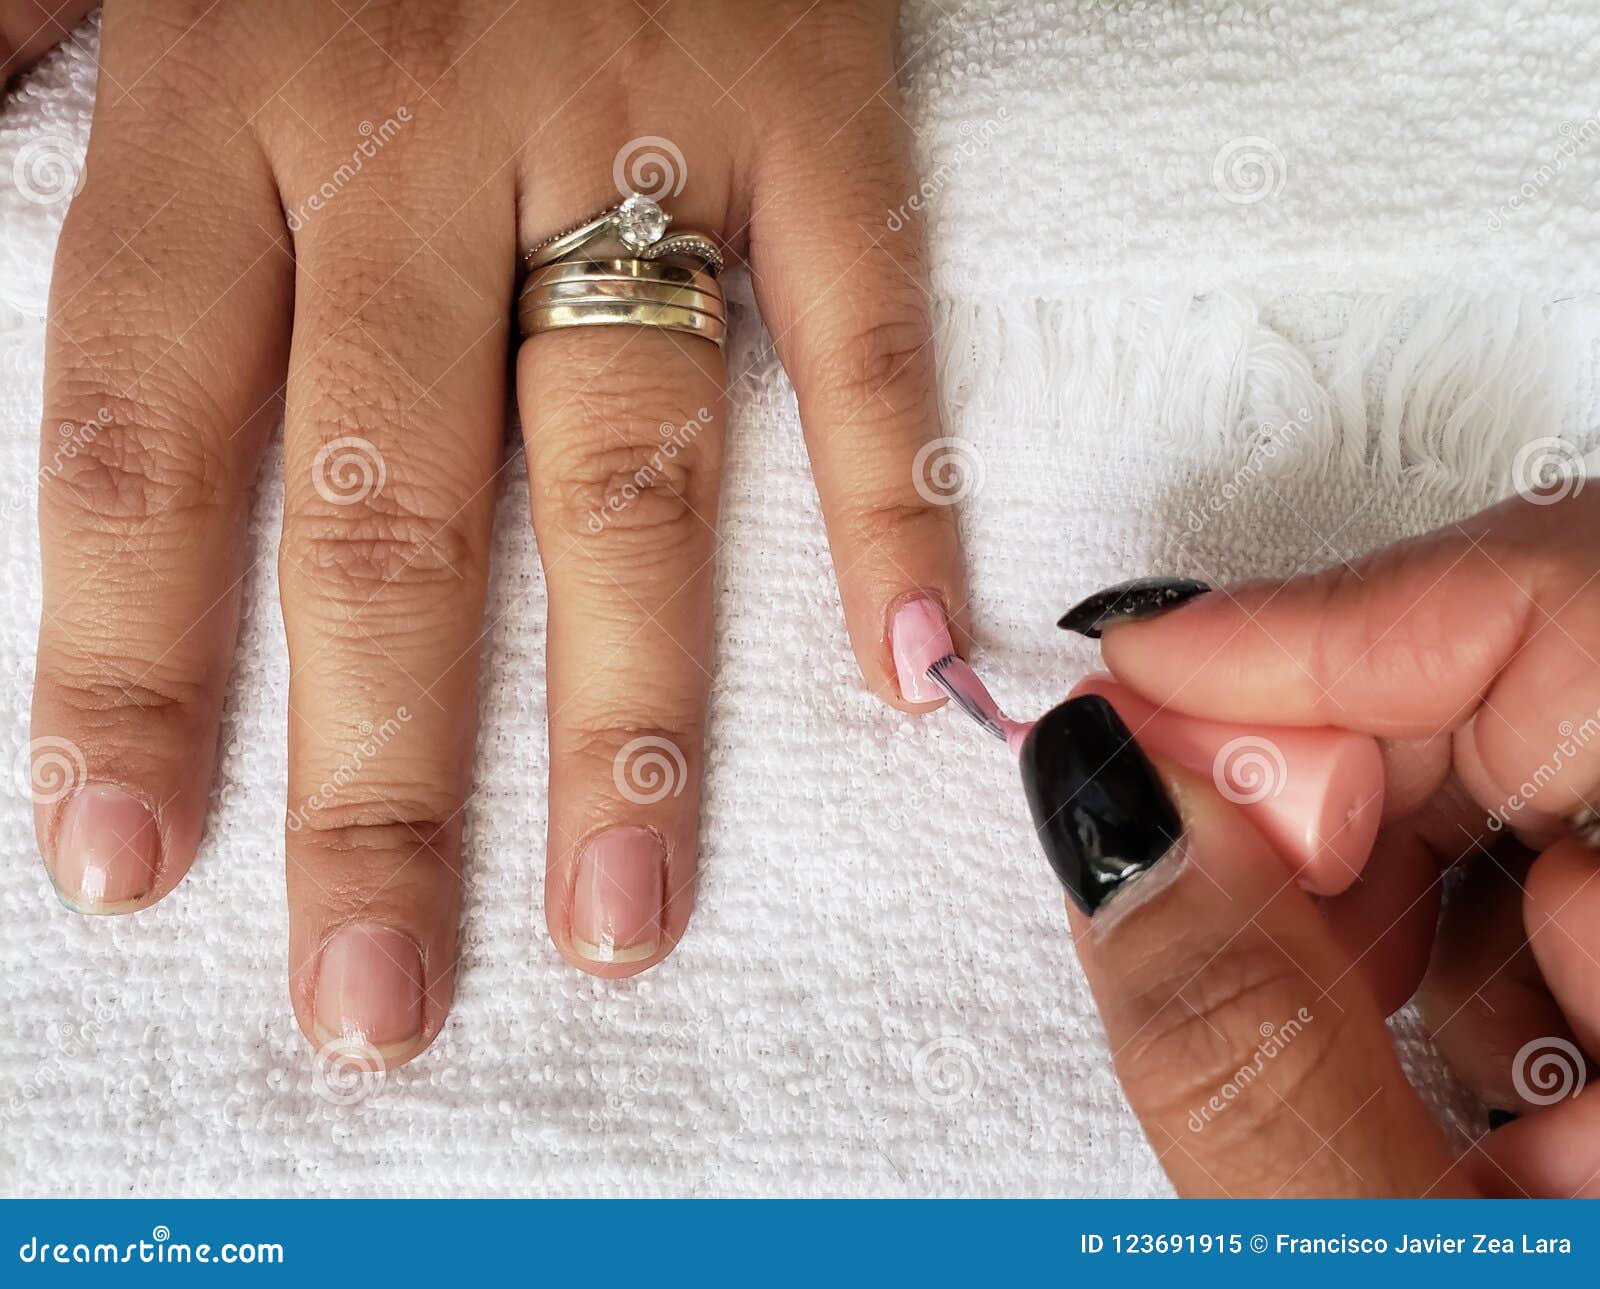 woman painting the fingernails of another woman with light pink nail polish